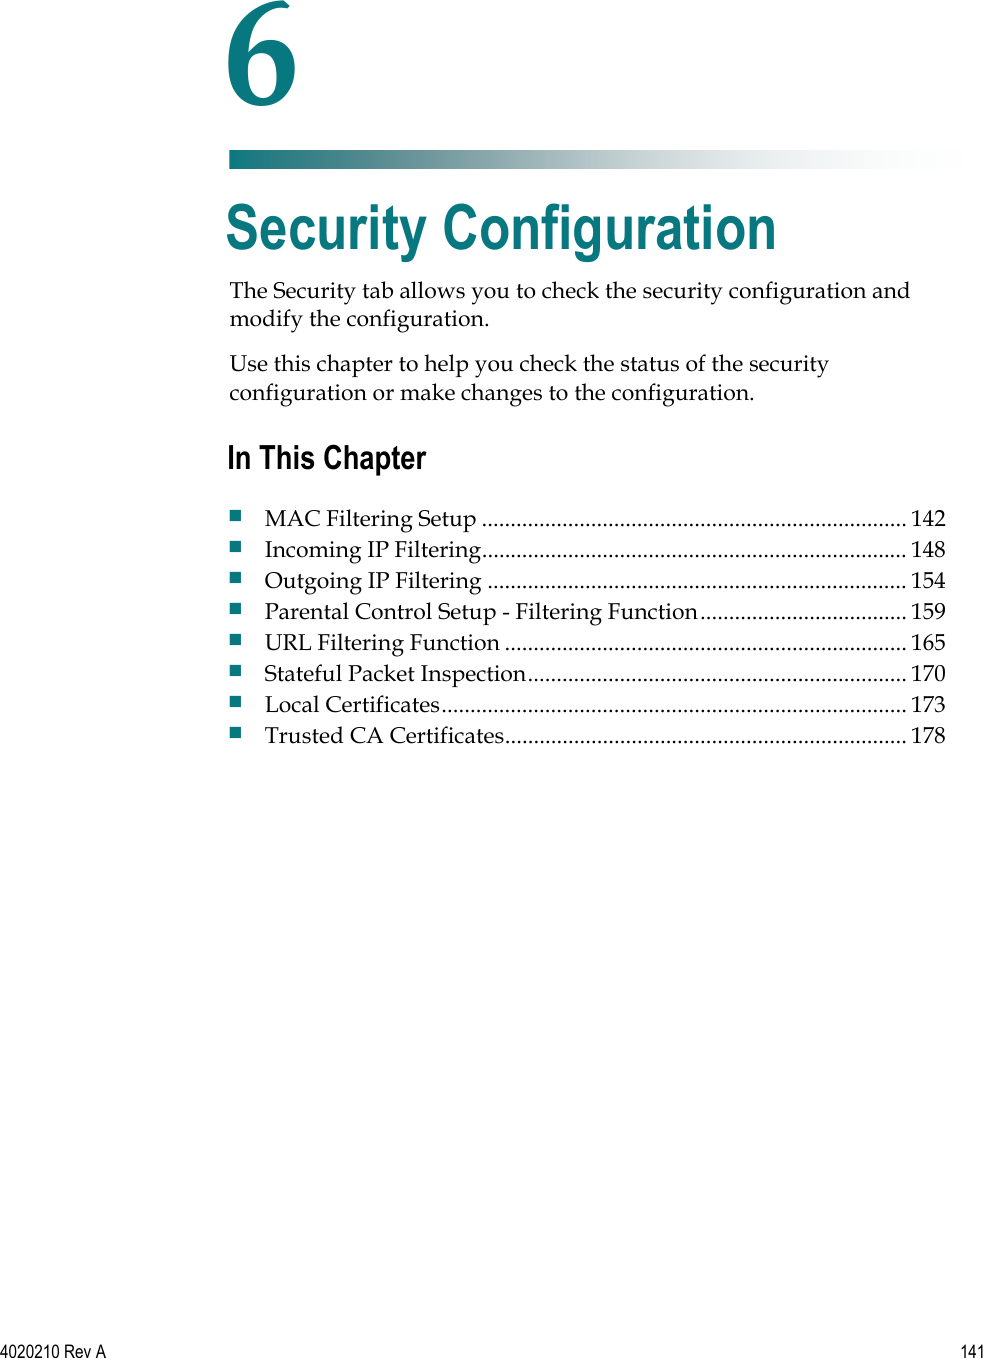   4020210 Rev A 141  The Security tab allows you to check the security configuration and modify the configuration. Use this chapter to help you check the status of the security configuration or make changes to the configuration.    6 Chapter 6 Security Configuration In This Chapter  MAC Filtering Setup .......................................................................... 142  Incoming IP Filtering.......................................................................... 148  Outgoing IP Filtering ......................................................................... 154  Parental Control Setup - Filtering Function.................................... 159  URL Filtering Function ...................................................................... 165  Stateful Packet Inspection.................................................................. 170  Local Certificates................................................................................. 173  Trusted CA Certificates...................................................................... 178 